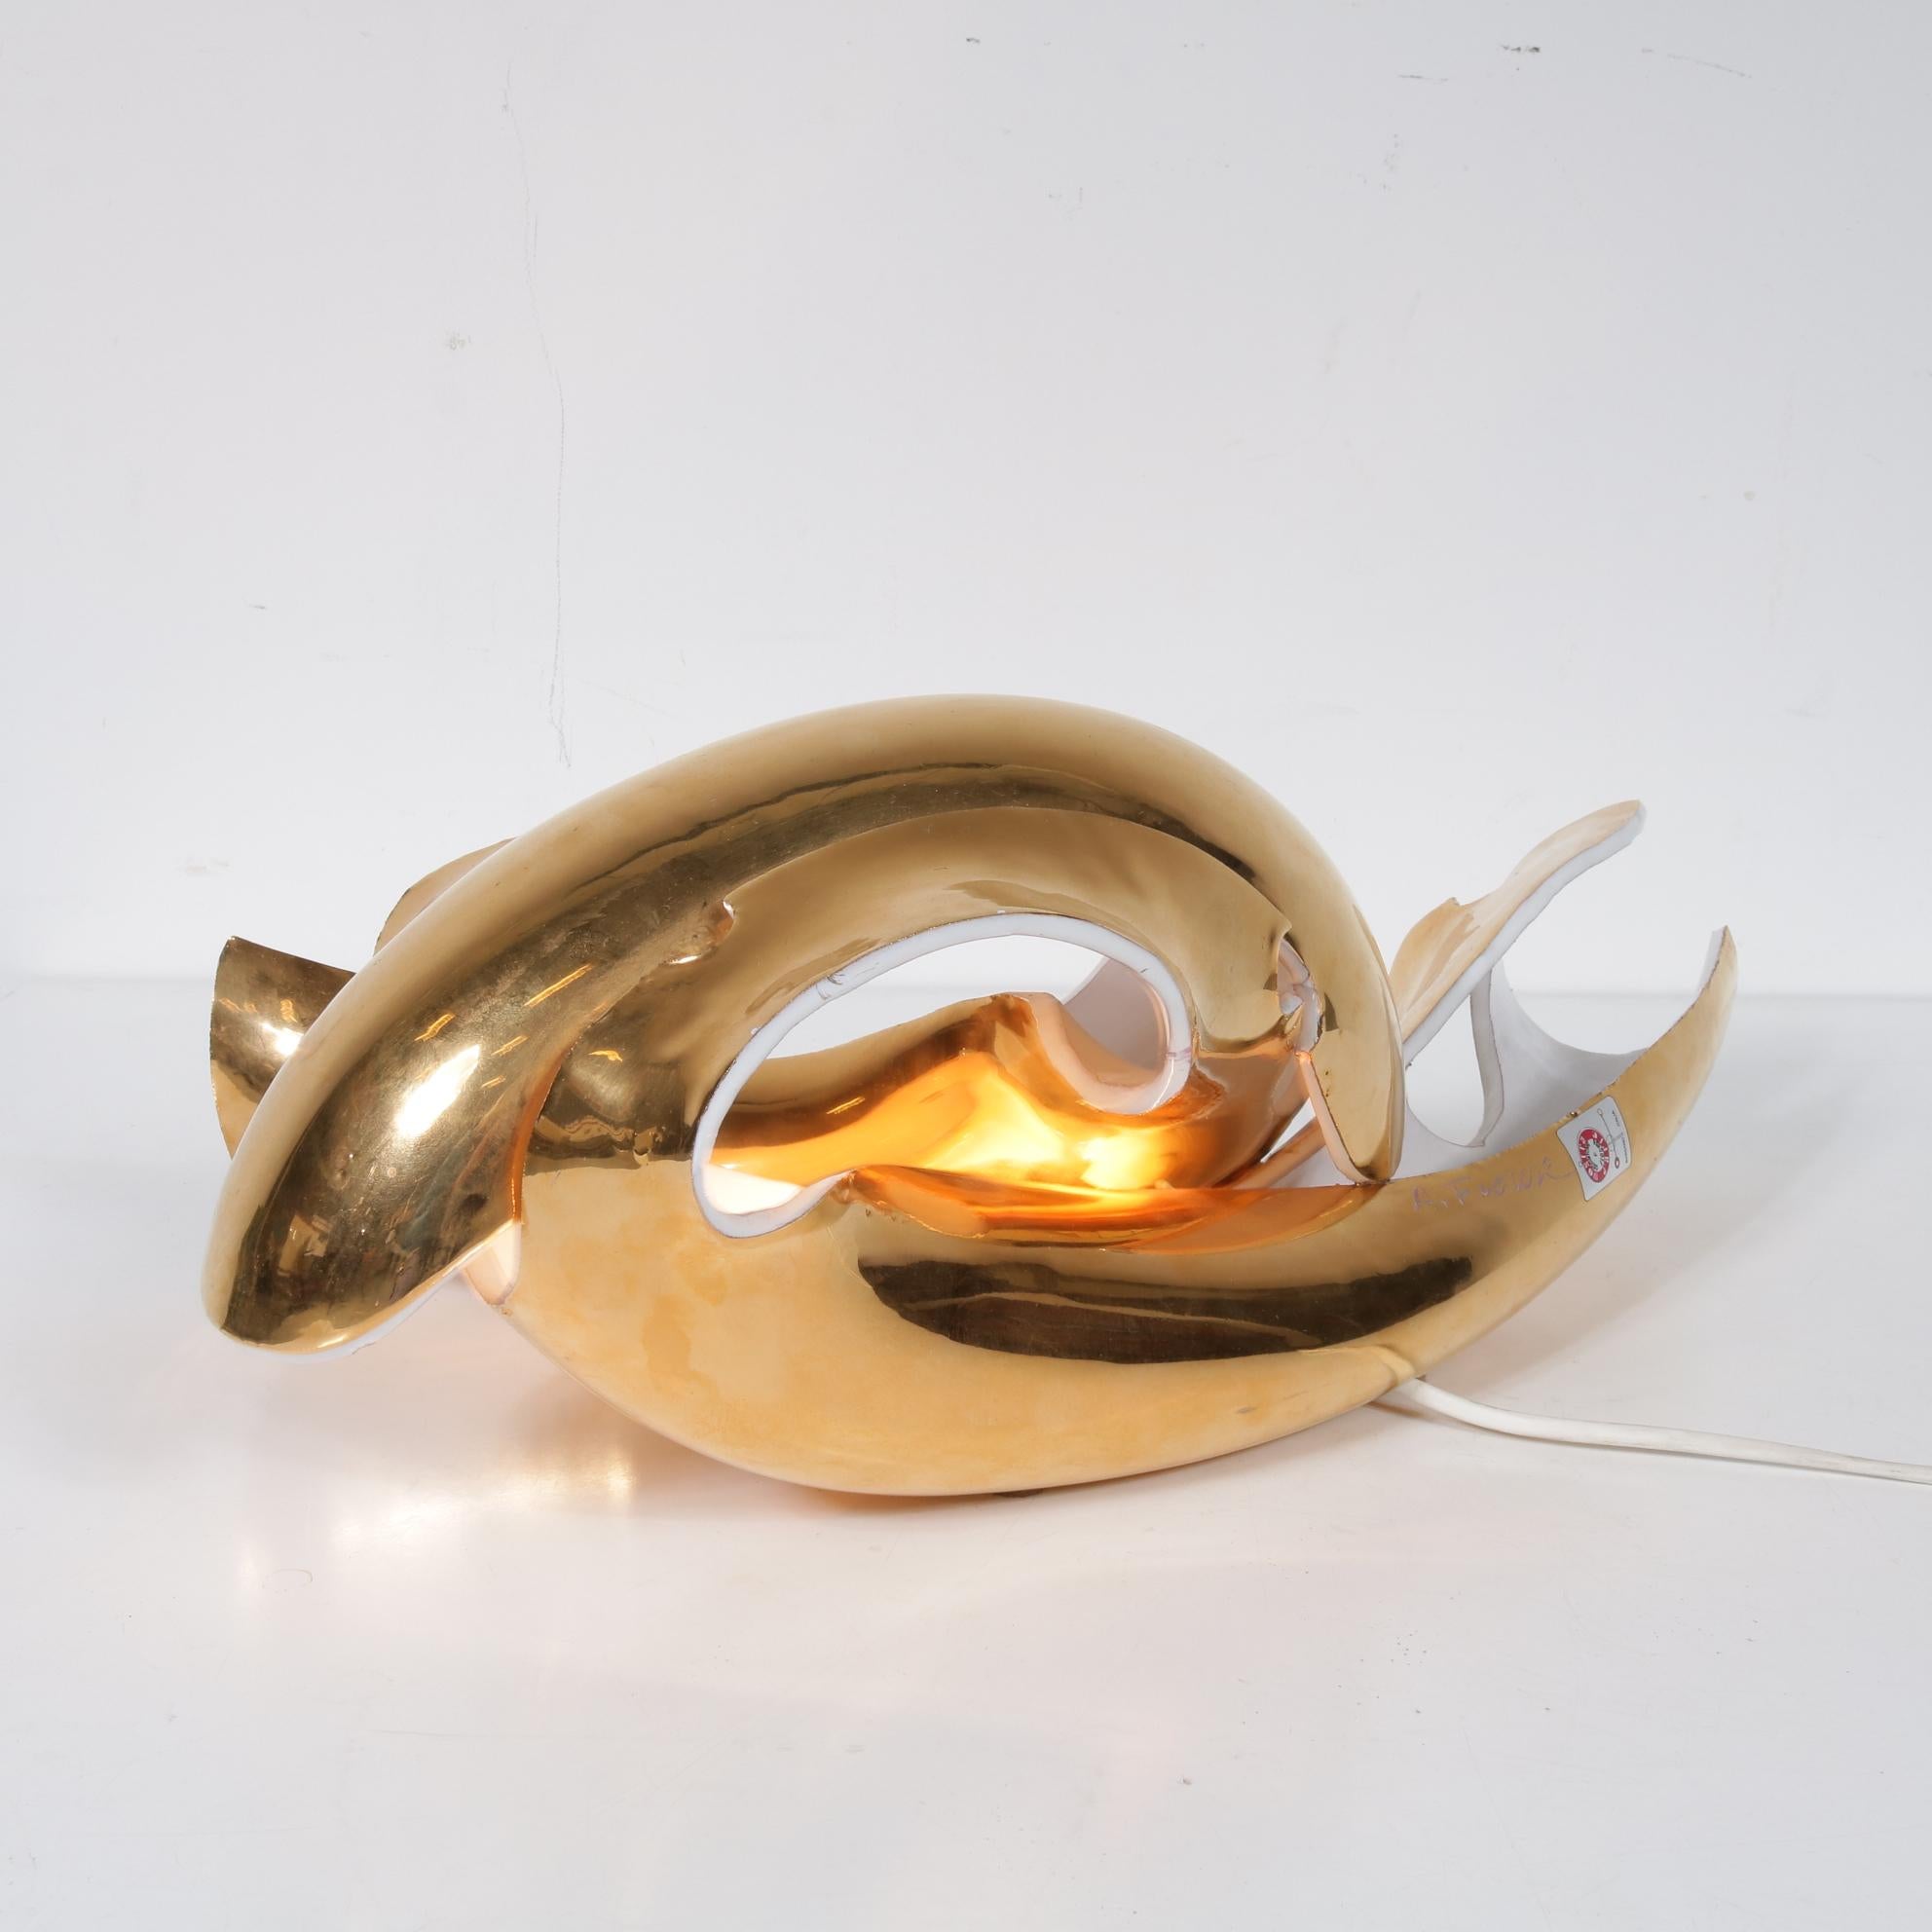 Sculptural Table Light by Amadeo Fiorese for Cermiche Fiorese, Italy 1960 For Sale 3